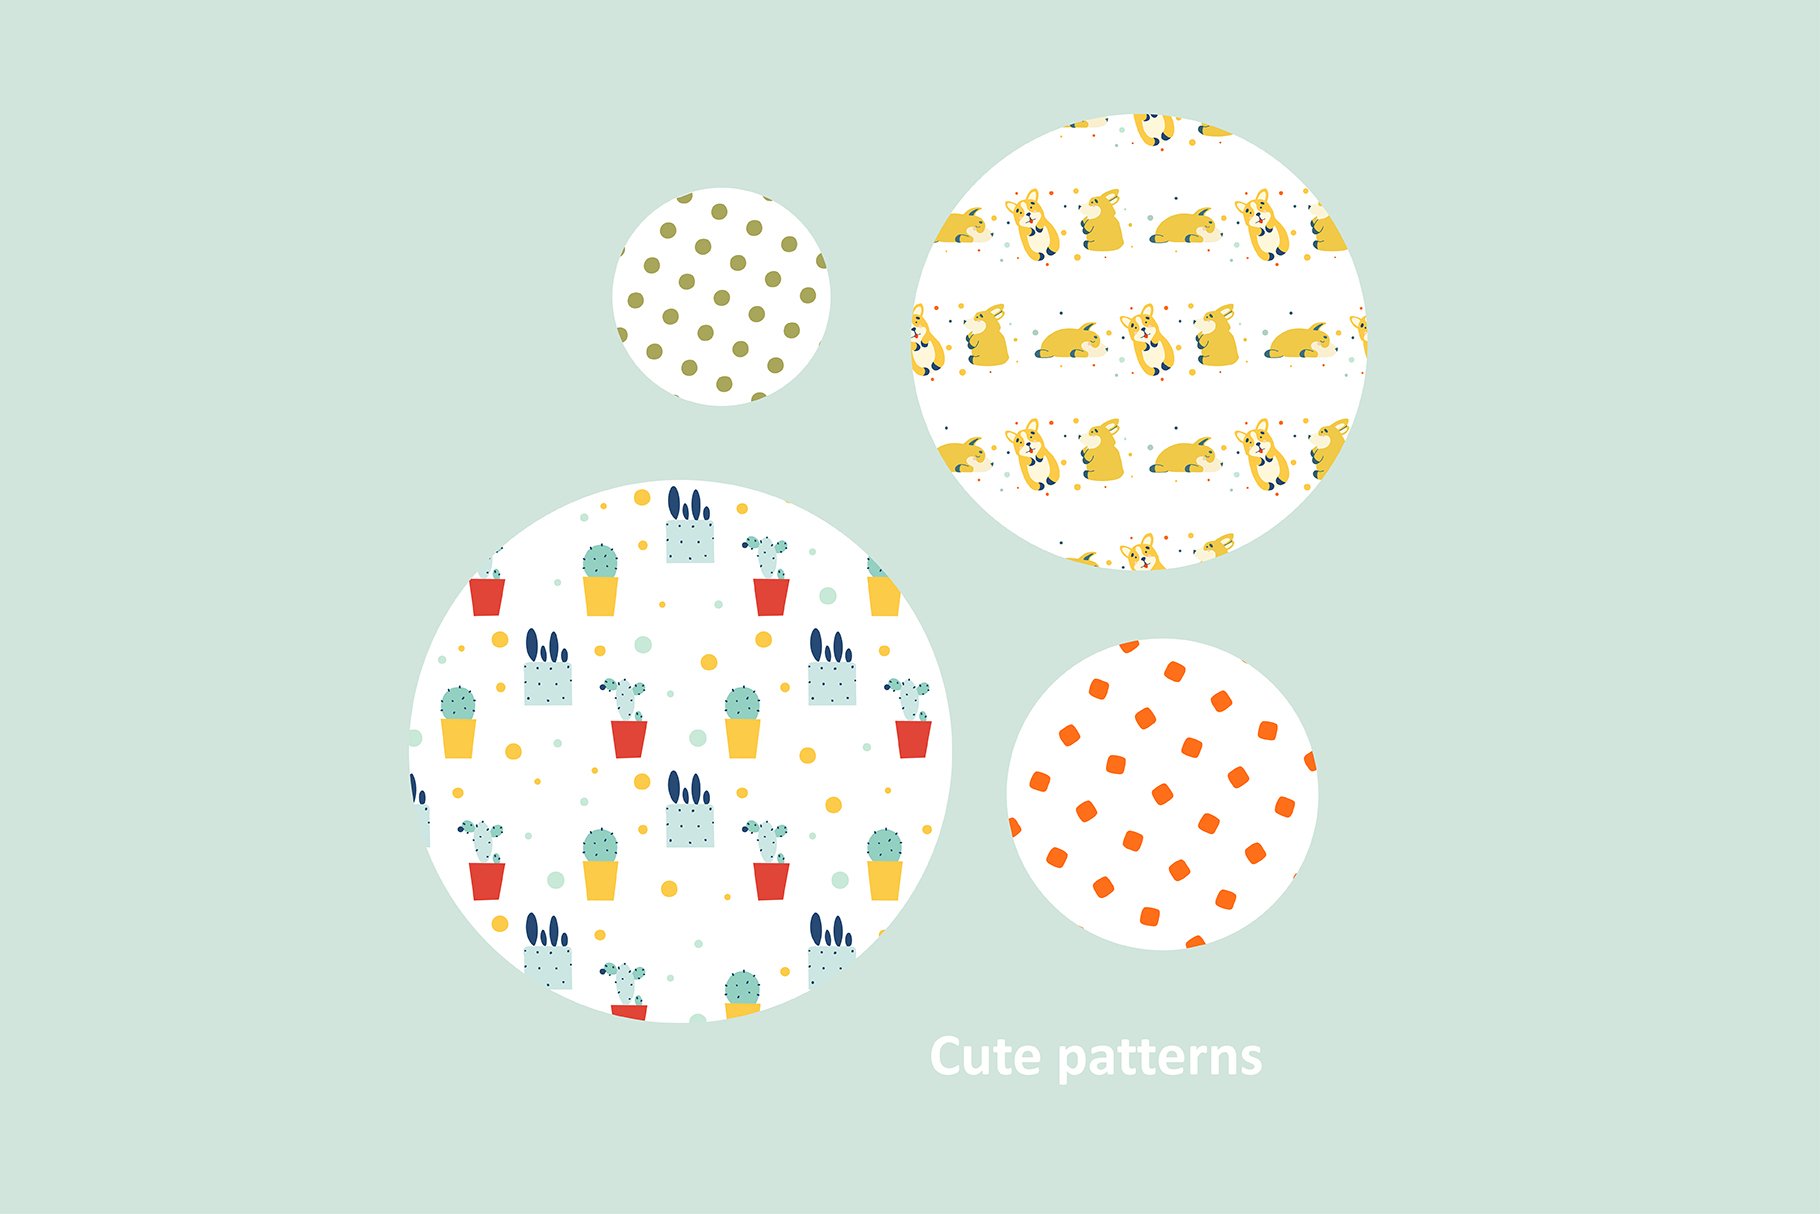 Some patterns for your illustrations.